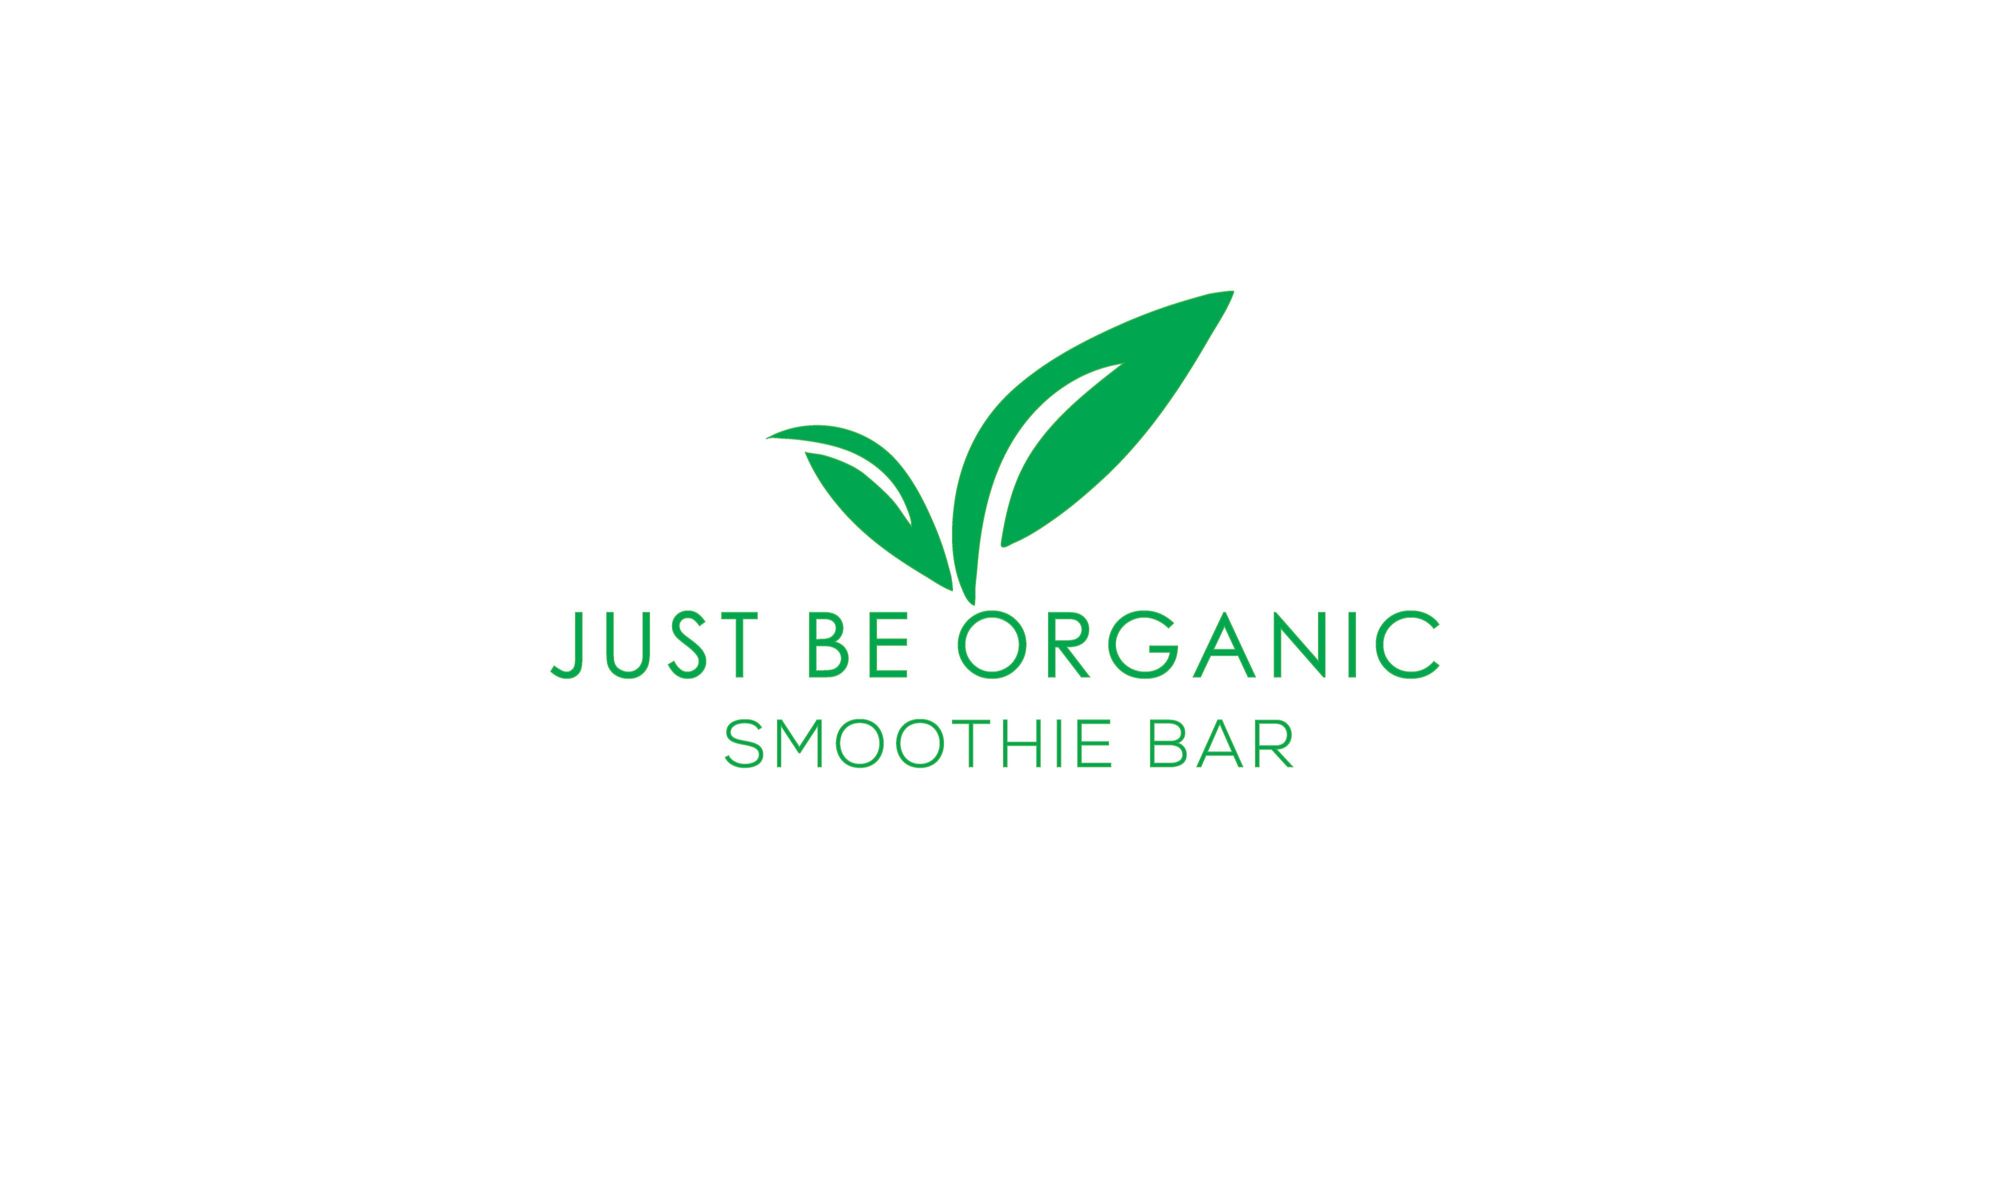 Unique and Healthy - Just Be Organic Smoothie Bar